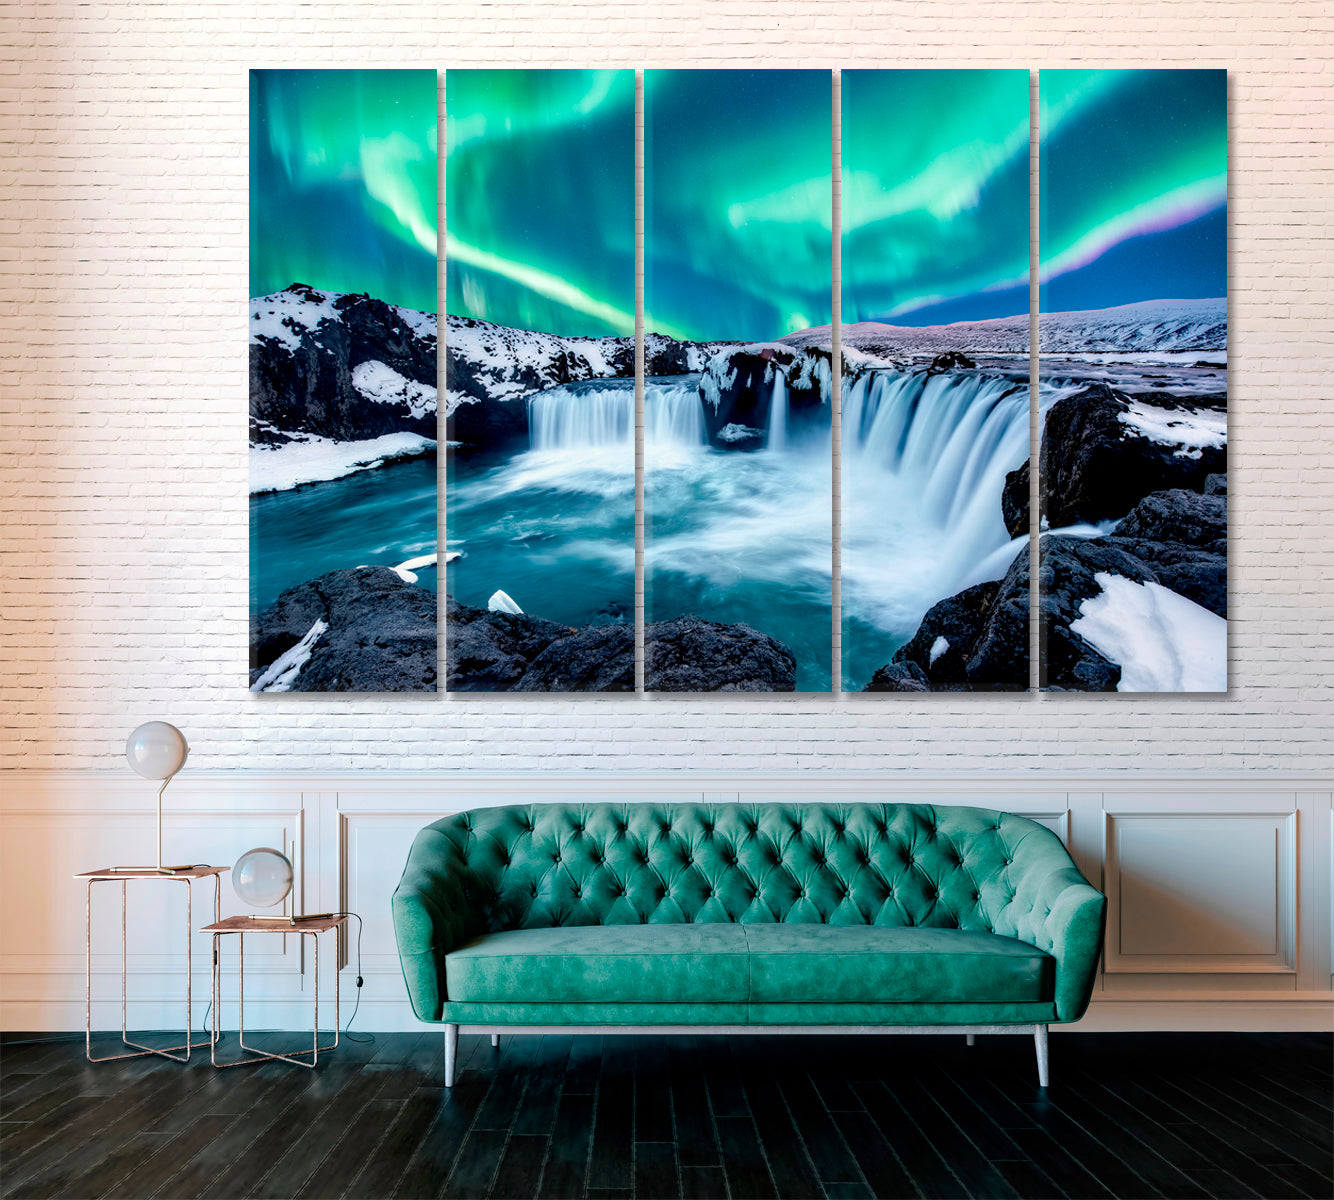 Aurora Borealis over Godafoss Waterfall in Iceland Canvas Print ArtLexy 5 Panels 36"x24" inches 